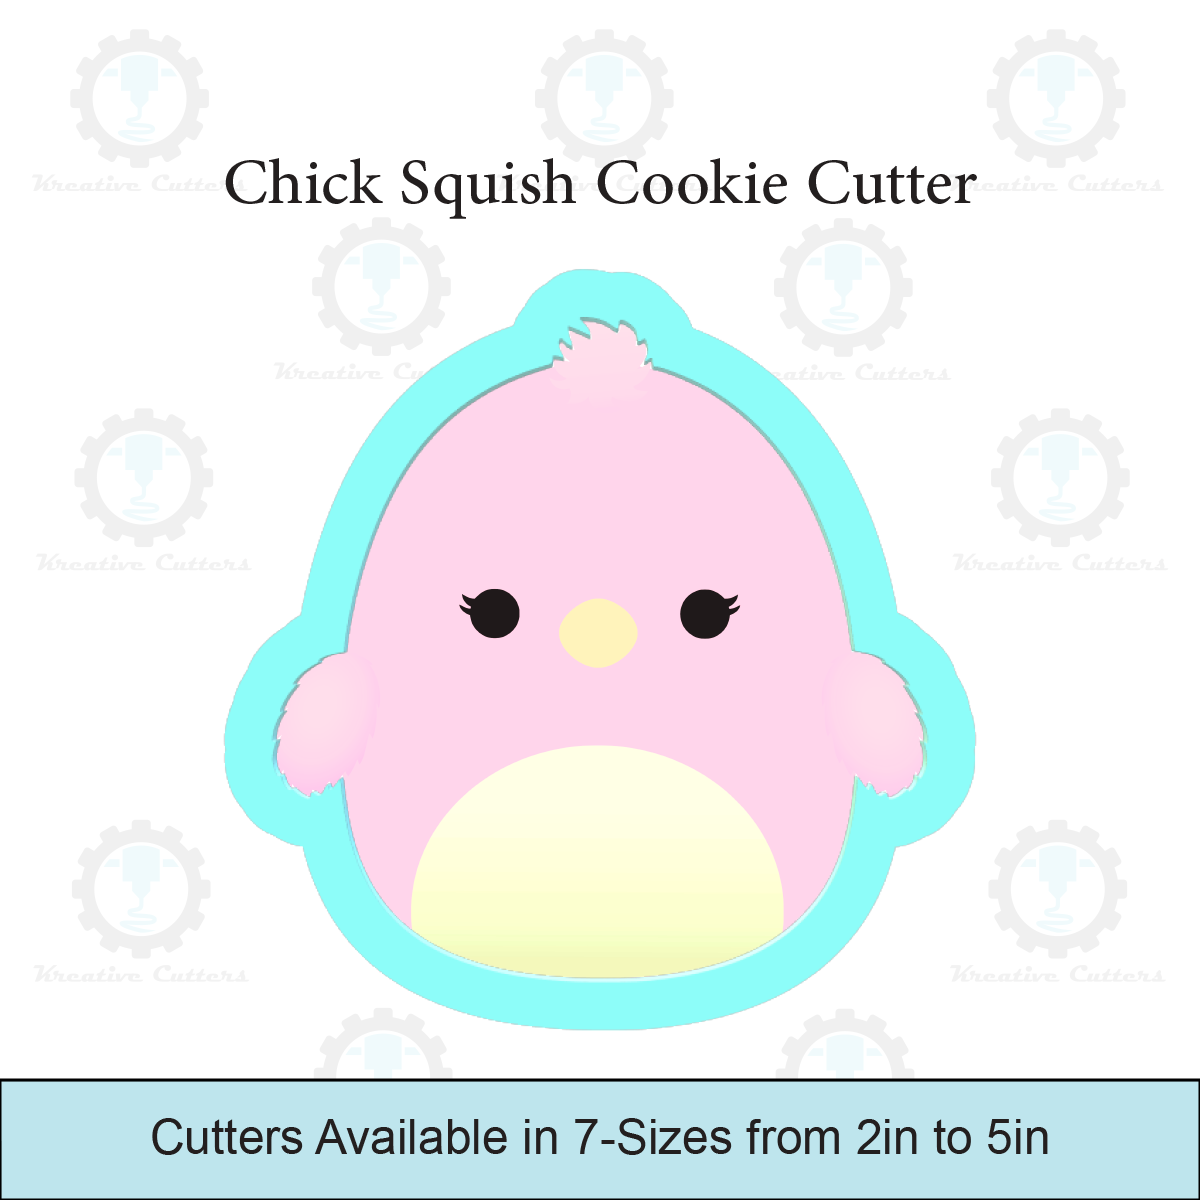 Chick Squish Cookie Cutters